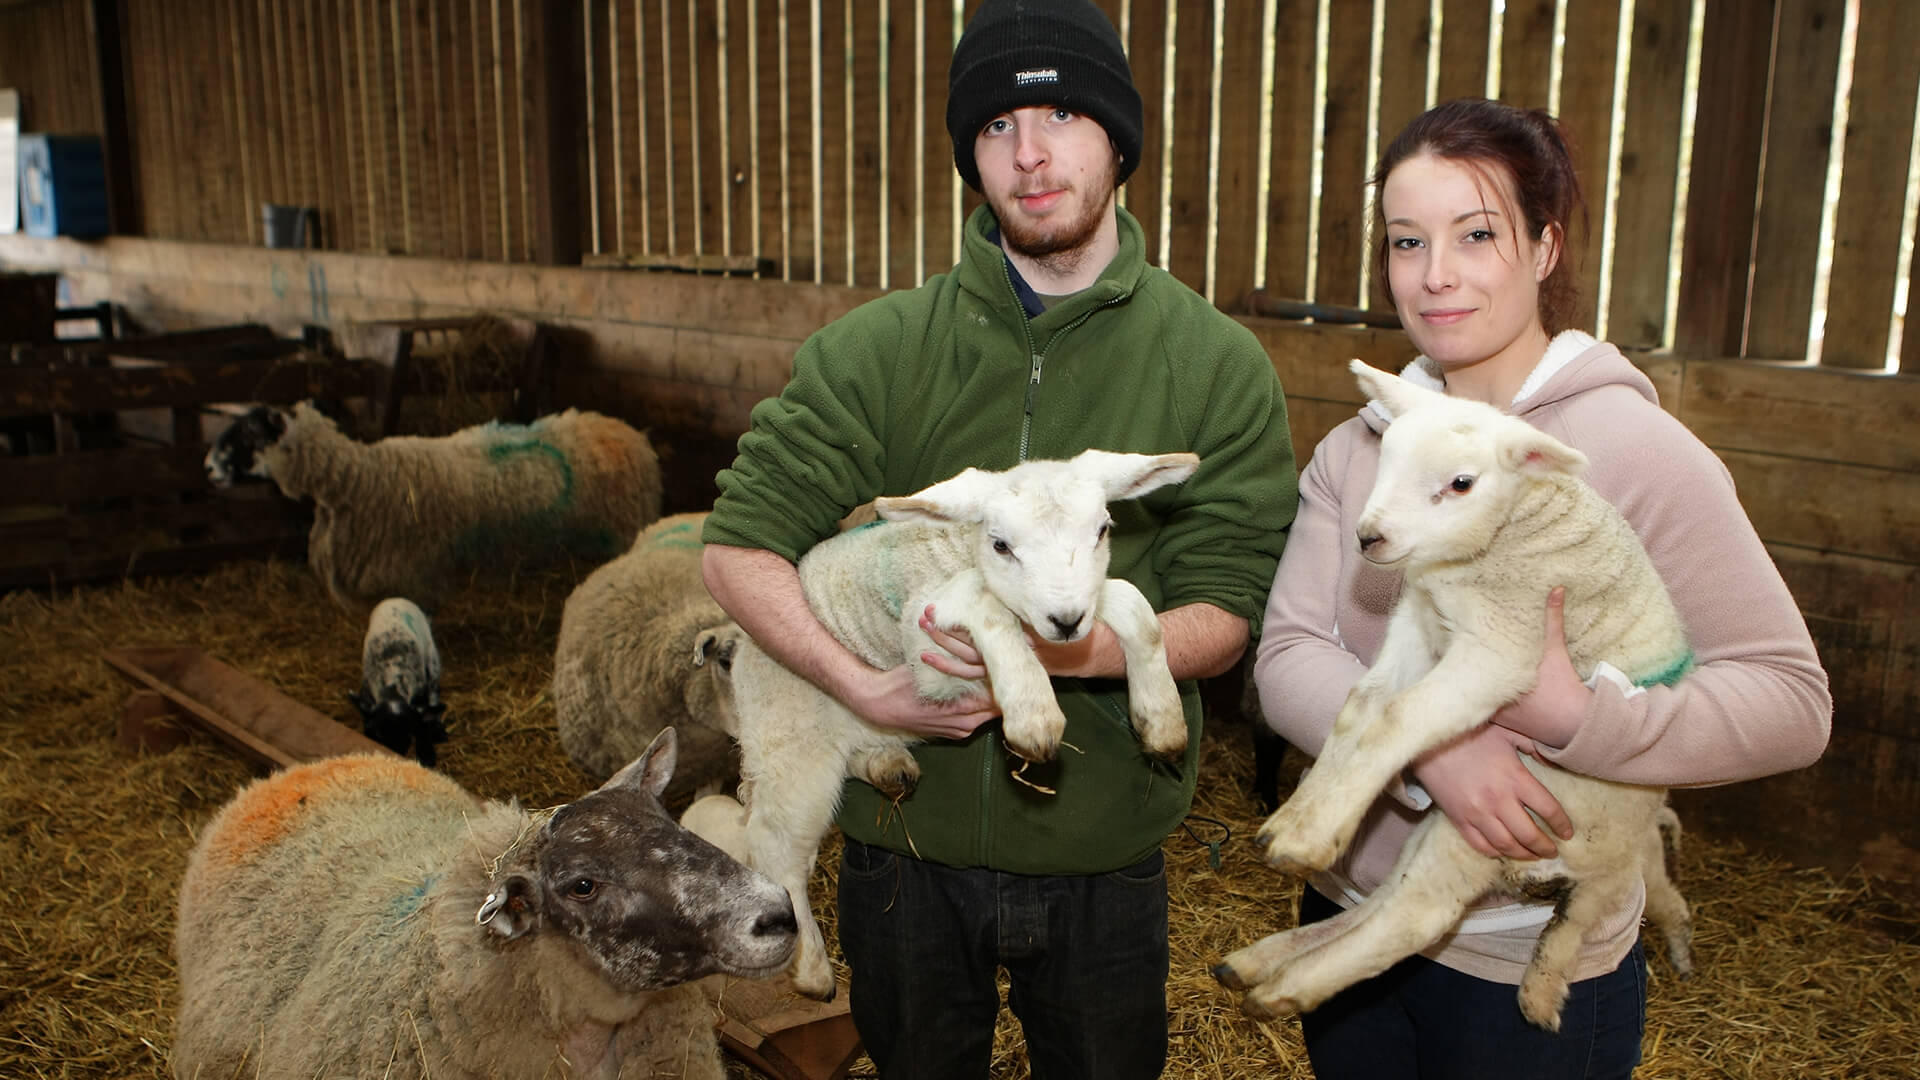 Two young students holding lambs each, in a barn full of sheep.